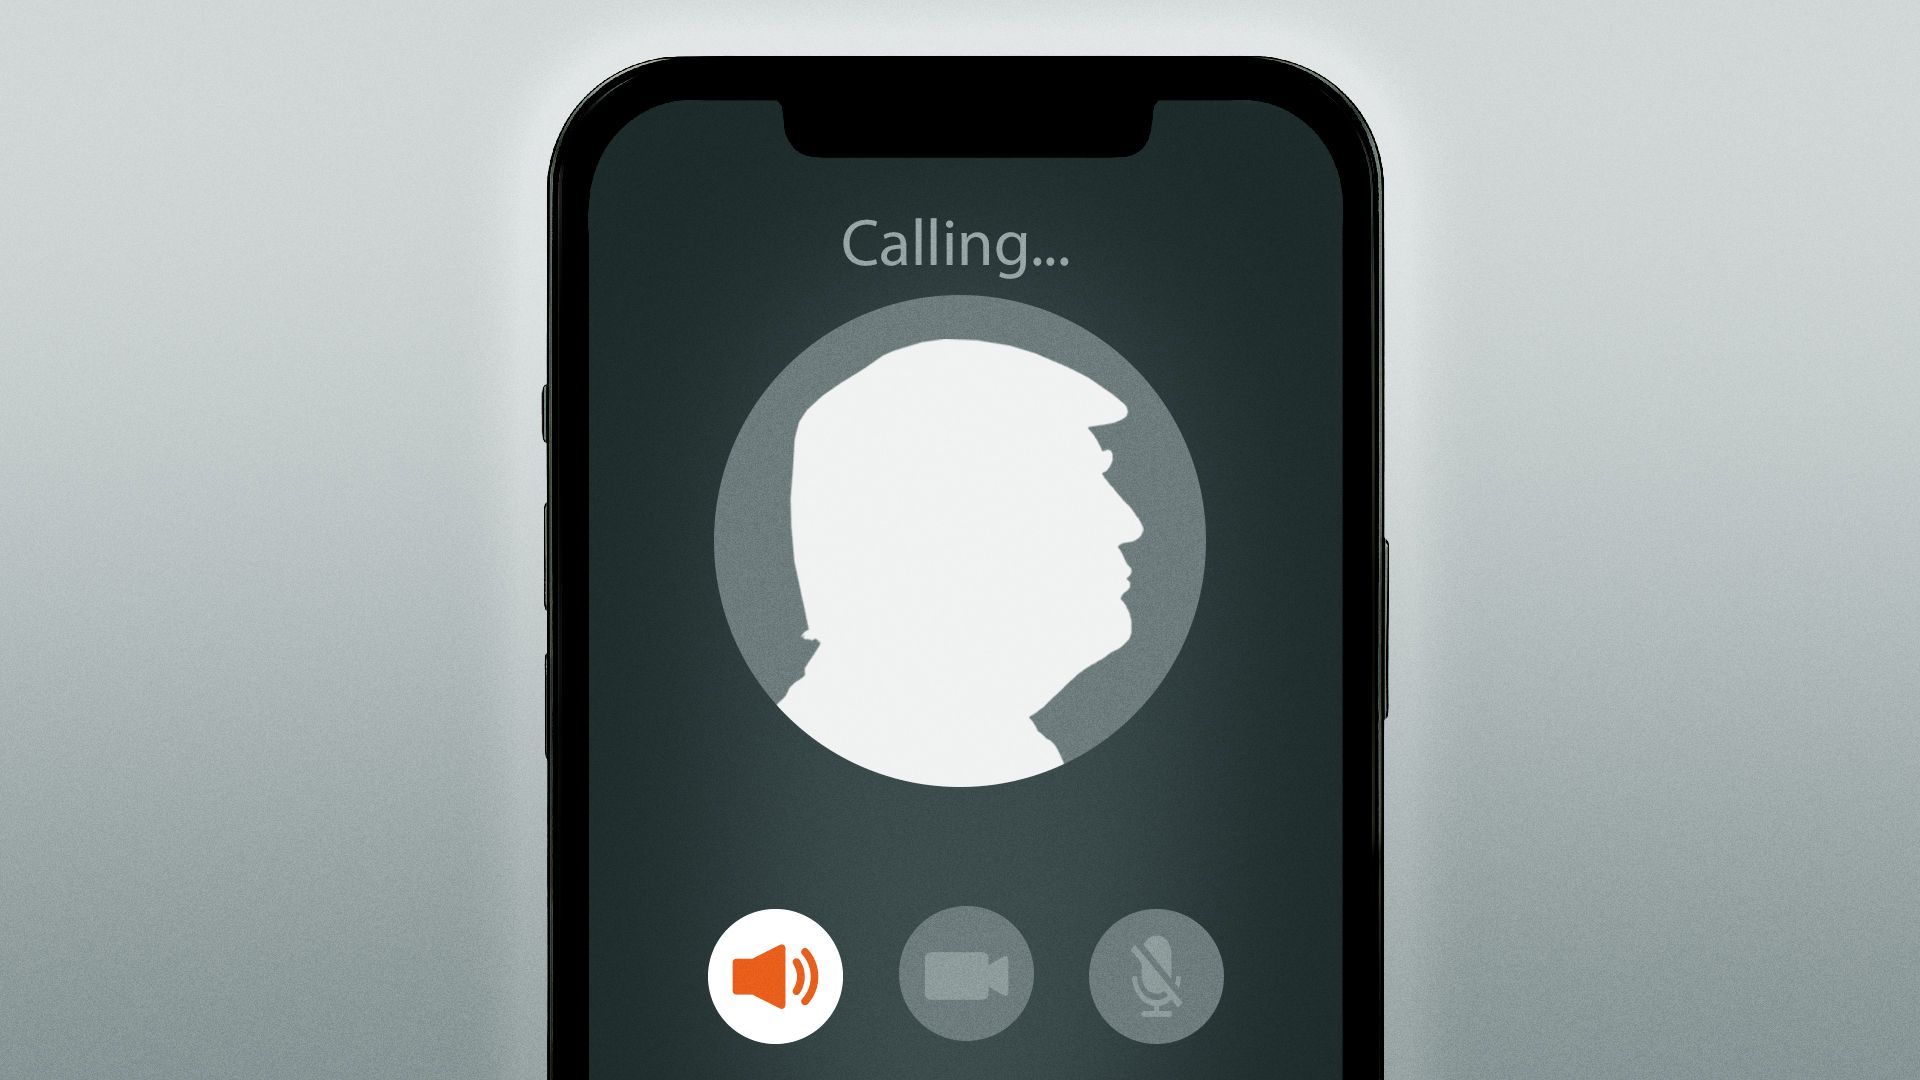 Illustration of a smartphone screen with Donald Trump's silhouette as an avatar, the word "Calling..." and the speakerphone icon highlighted.